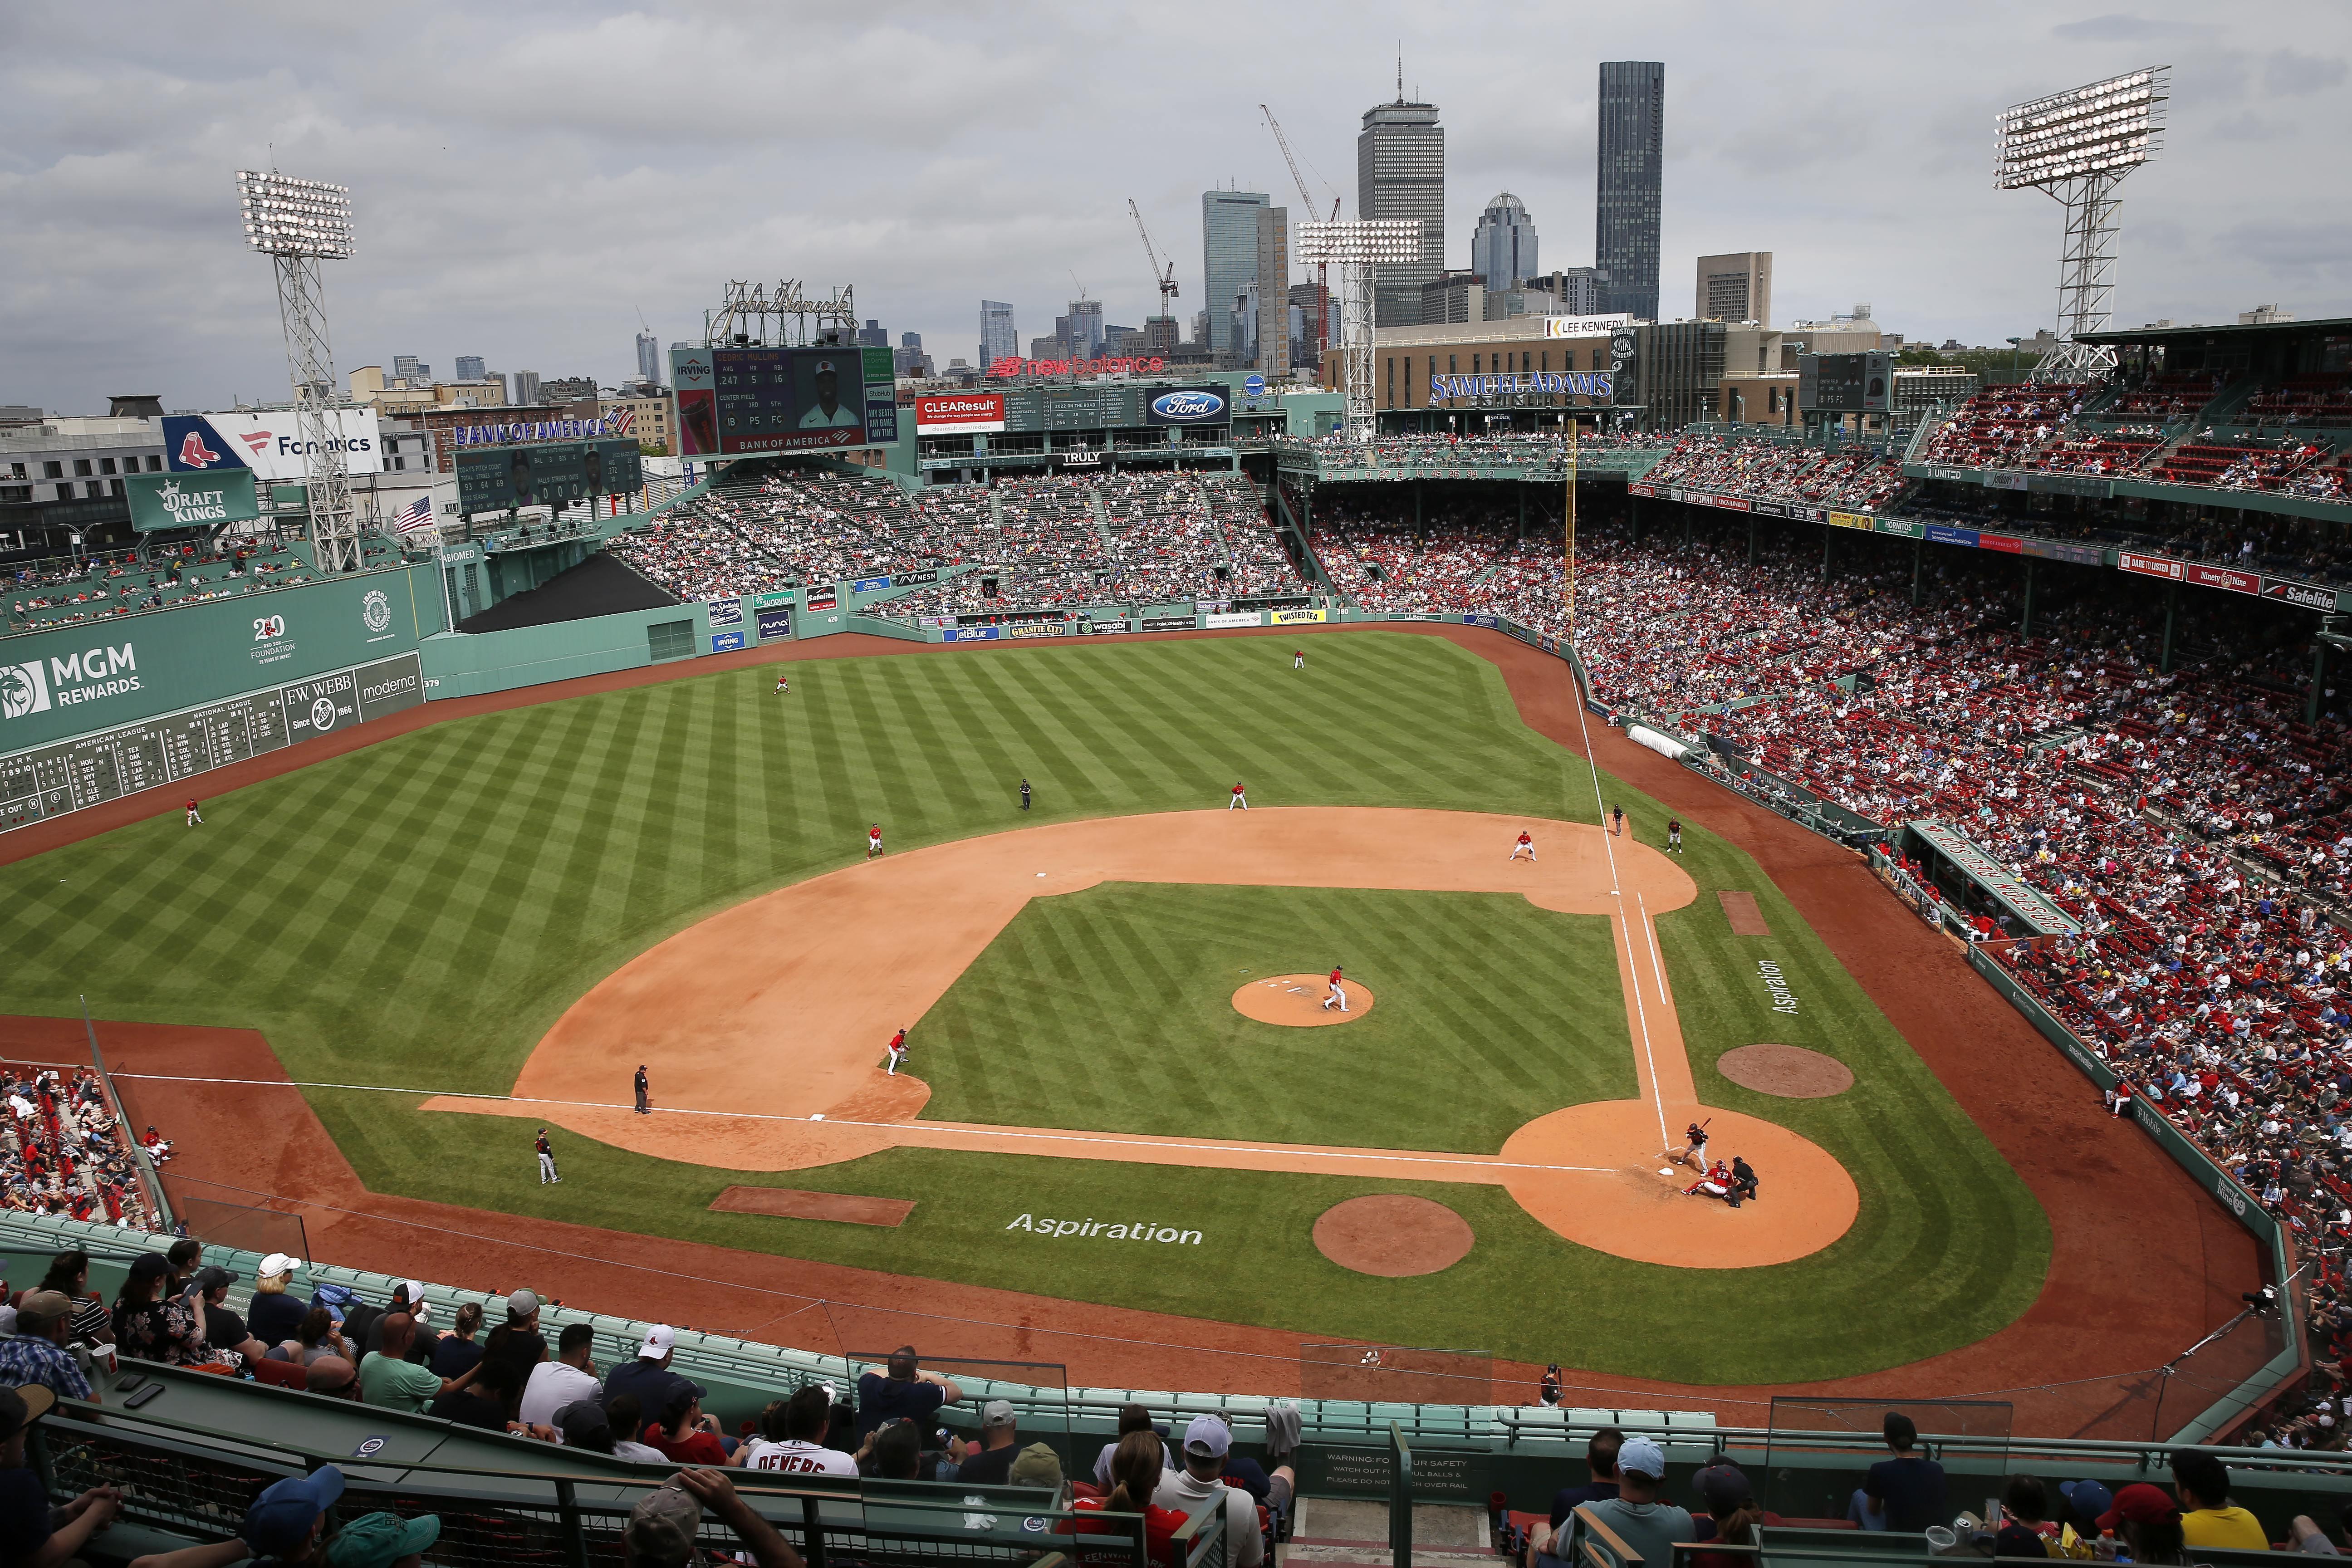 Boston: Witness an Boston Red Sox Major League Baseball Game at Fenway Park